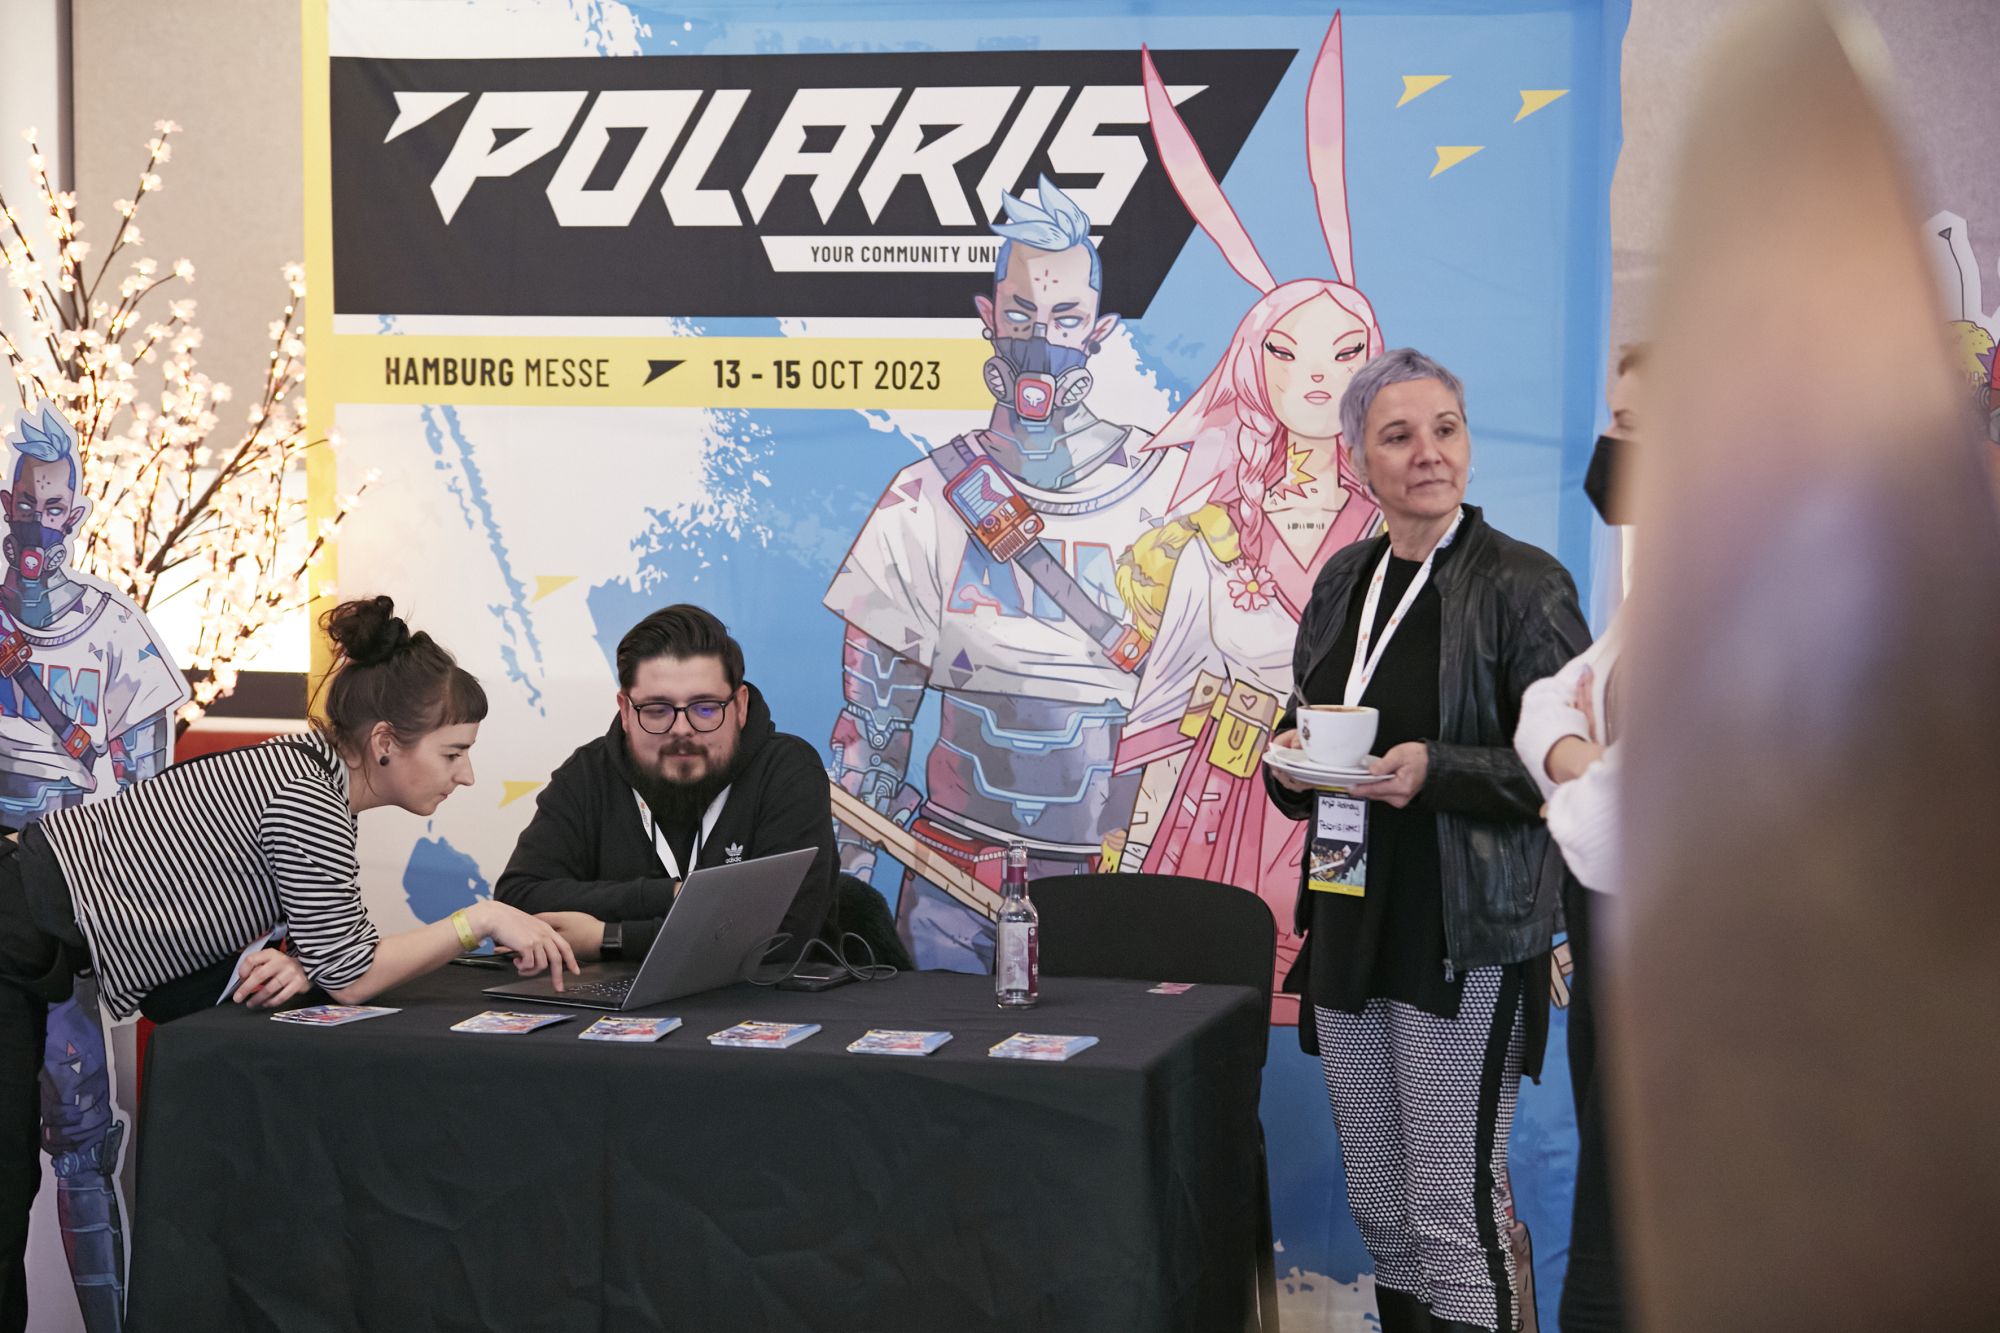 Expo booth of the Hamburg-based Polaris Convention | Photo by Rolf Otzipka